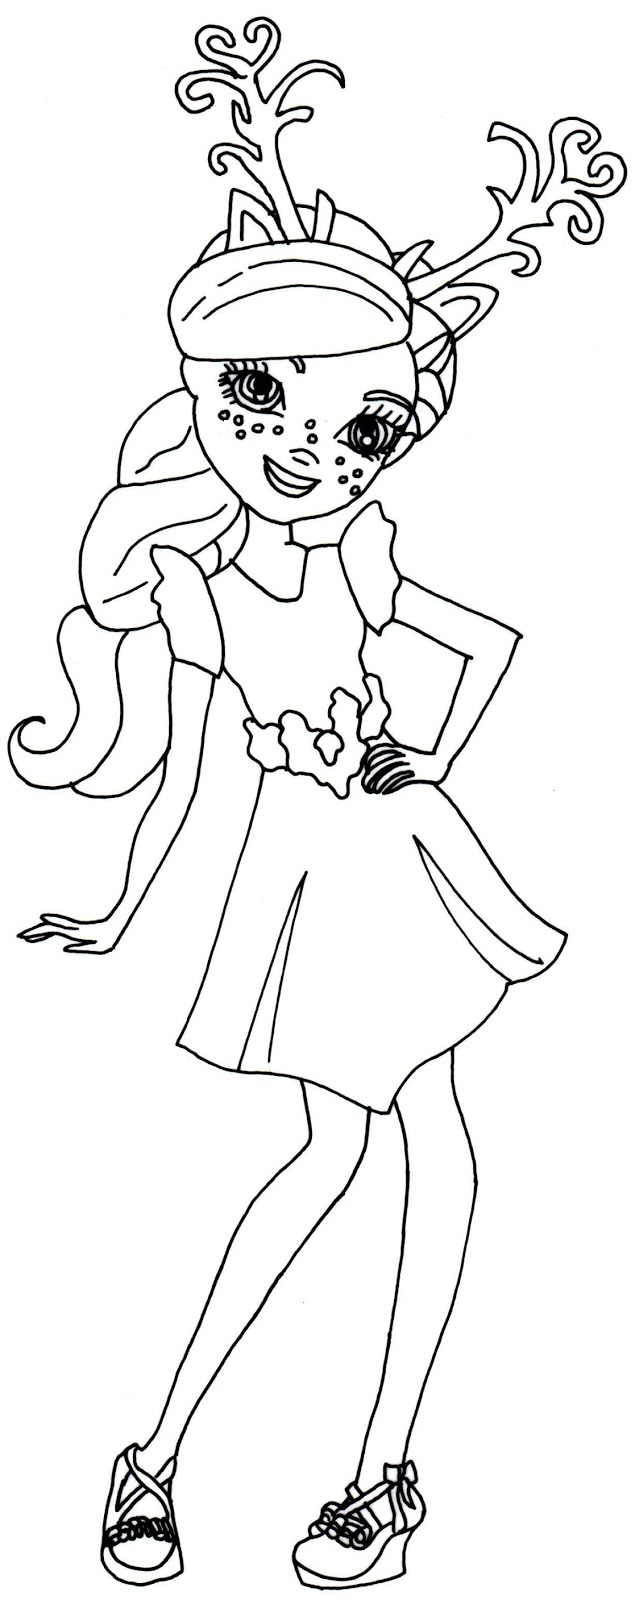 Free Printable Ever After High Coloring Pages: Deerla Ever After High  Coloring Page